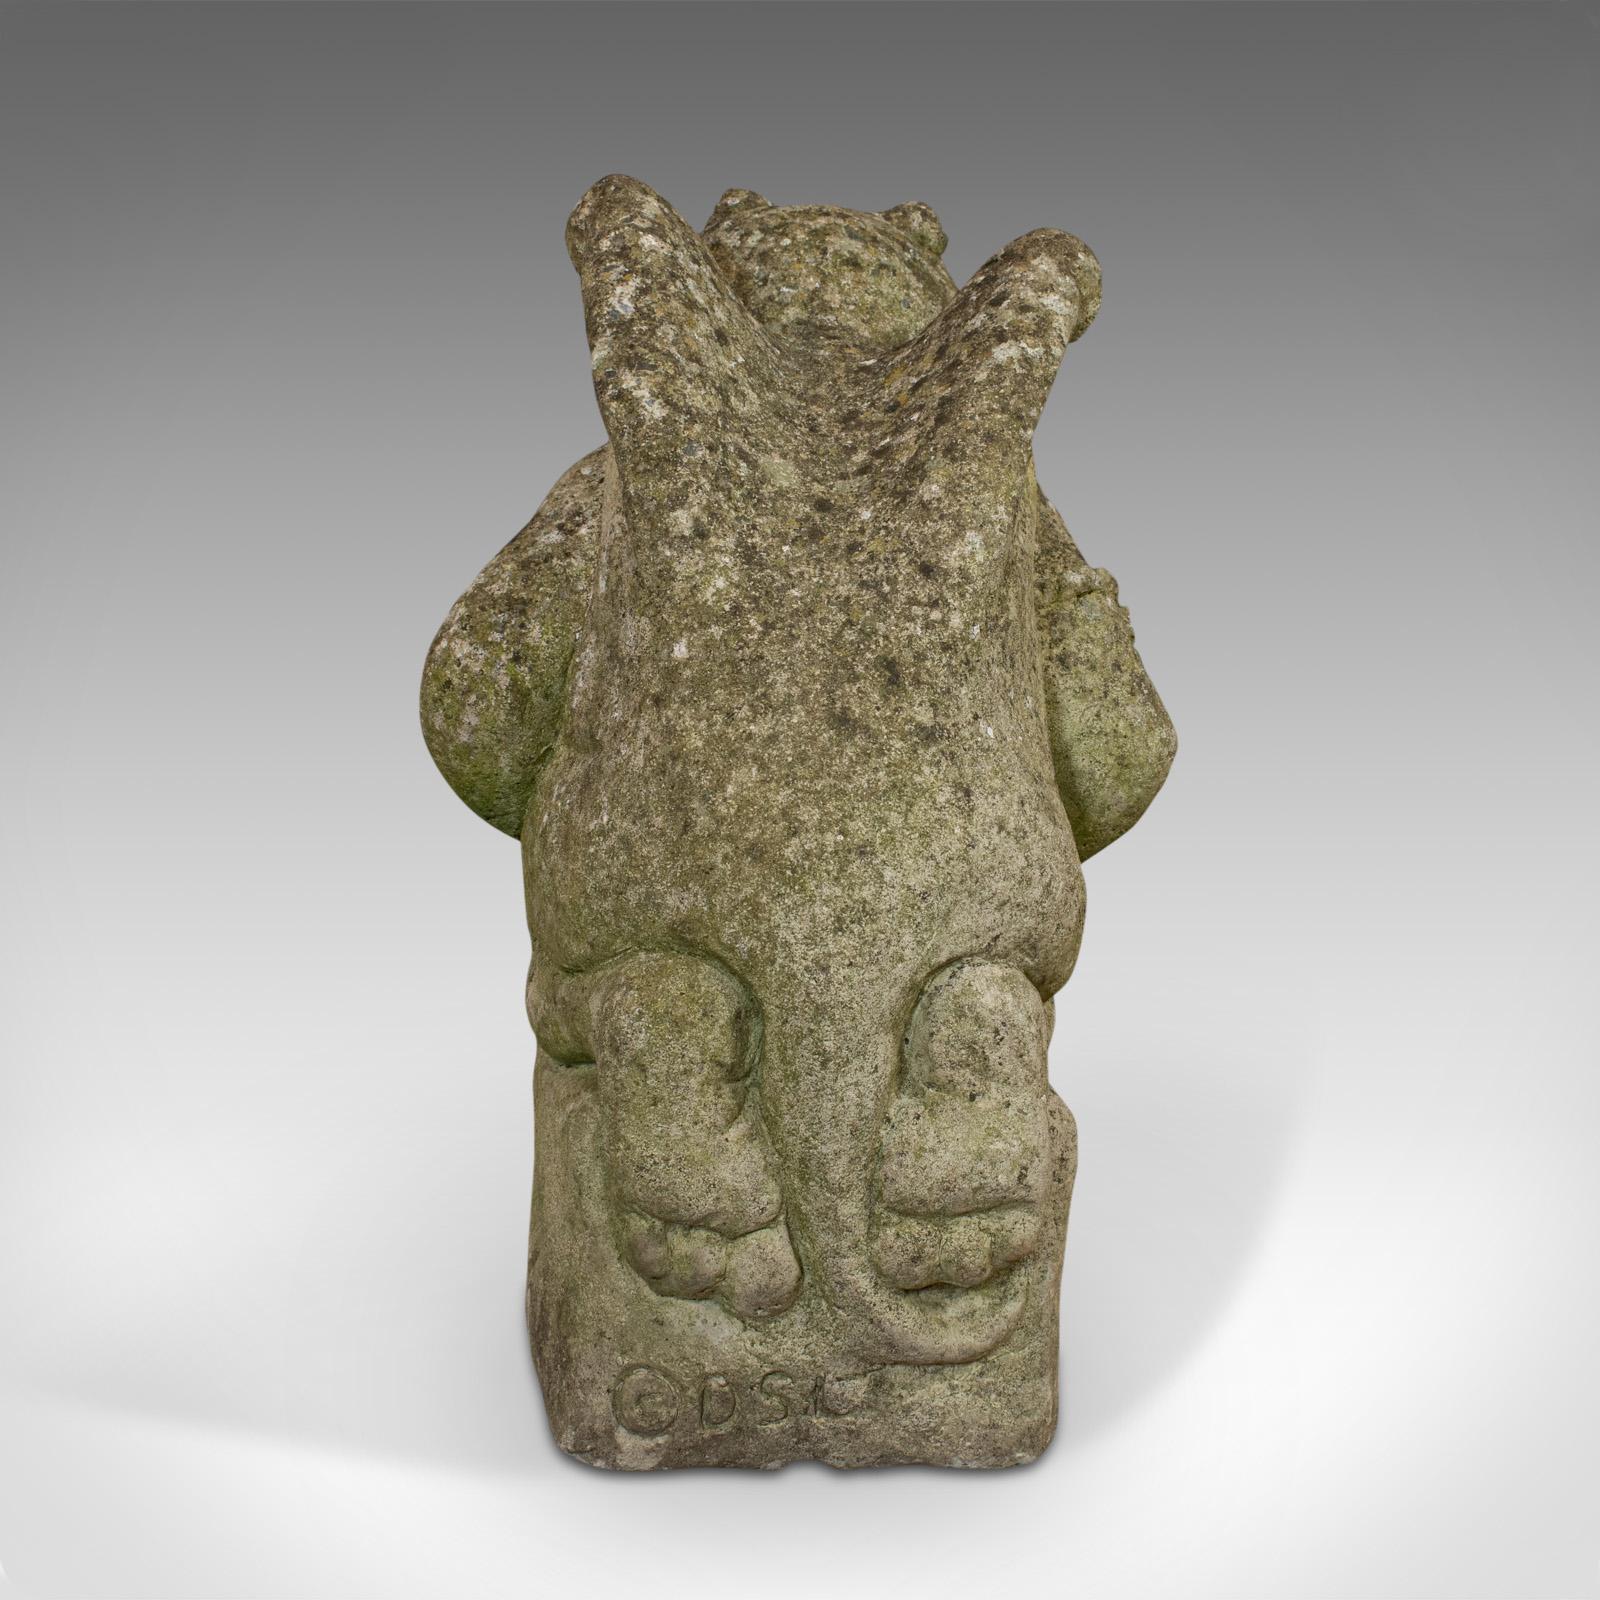 Late 20th Century Vintage Gargoyle, English, Reconstituted Stone, Outdoor Ornament, Water Feature